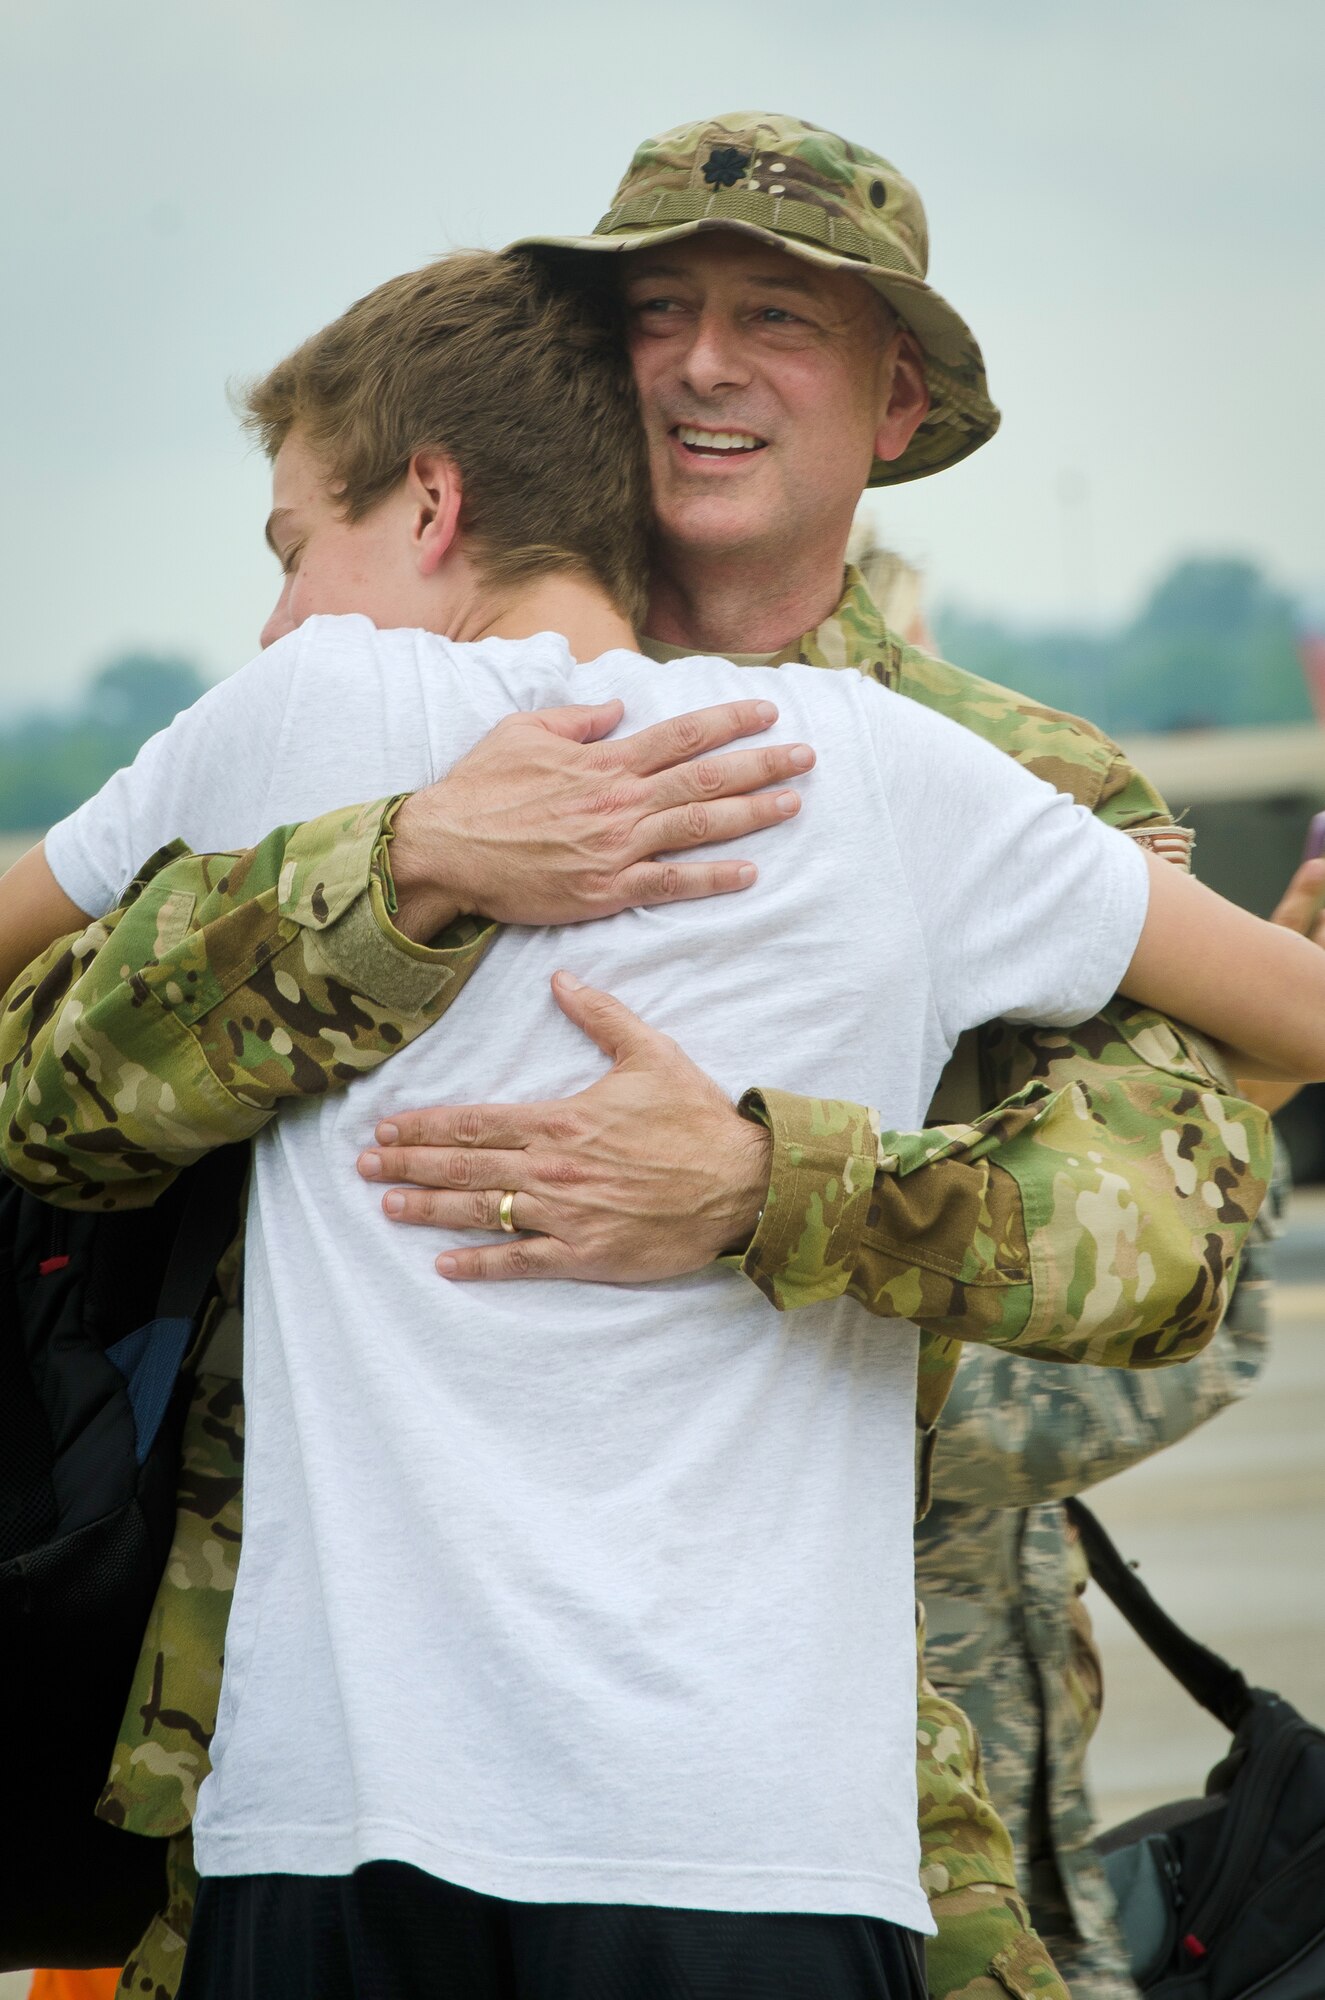 Lt. Col. Scott Ledford, a pilot in the 165th Airlift Squadron, embraces a family member during a homecoming ceremony at the Kentucky Air National Guard Base in Louisville, Ky., July 8, 2015. Ledford and 29 other Kentucky Air Guardsmen returned from a deployment to the Persian Gulf Region, where they’ve been supporting Operation Freedom’s Sentinel since February. (U.S. Air National Guard photo by Master Sgt. Phil Speck)